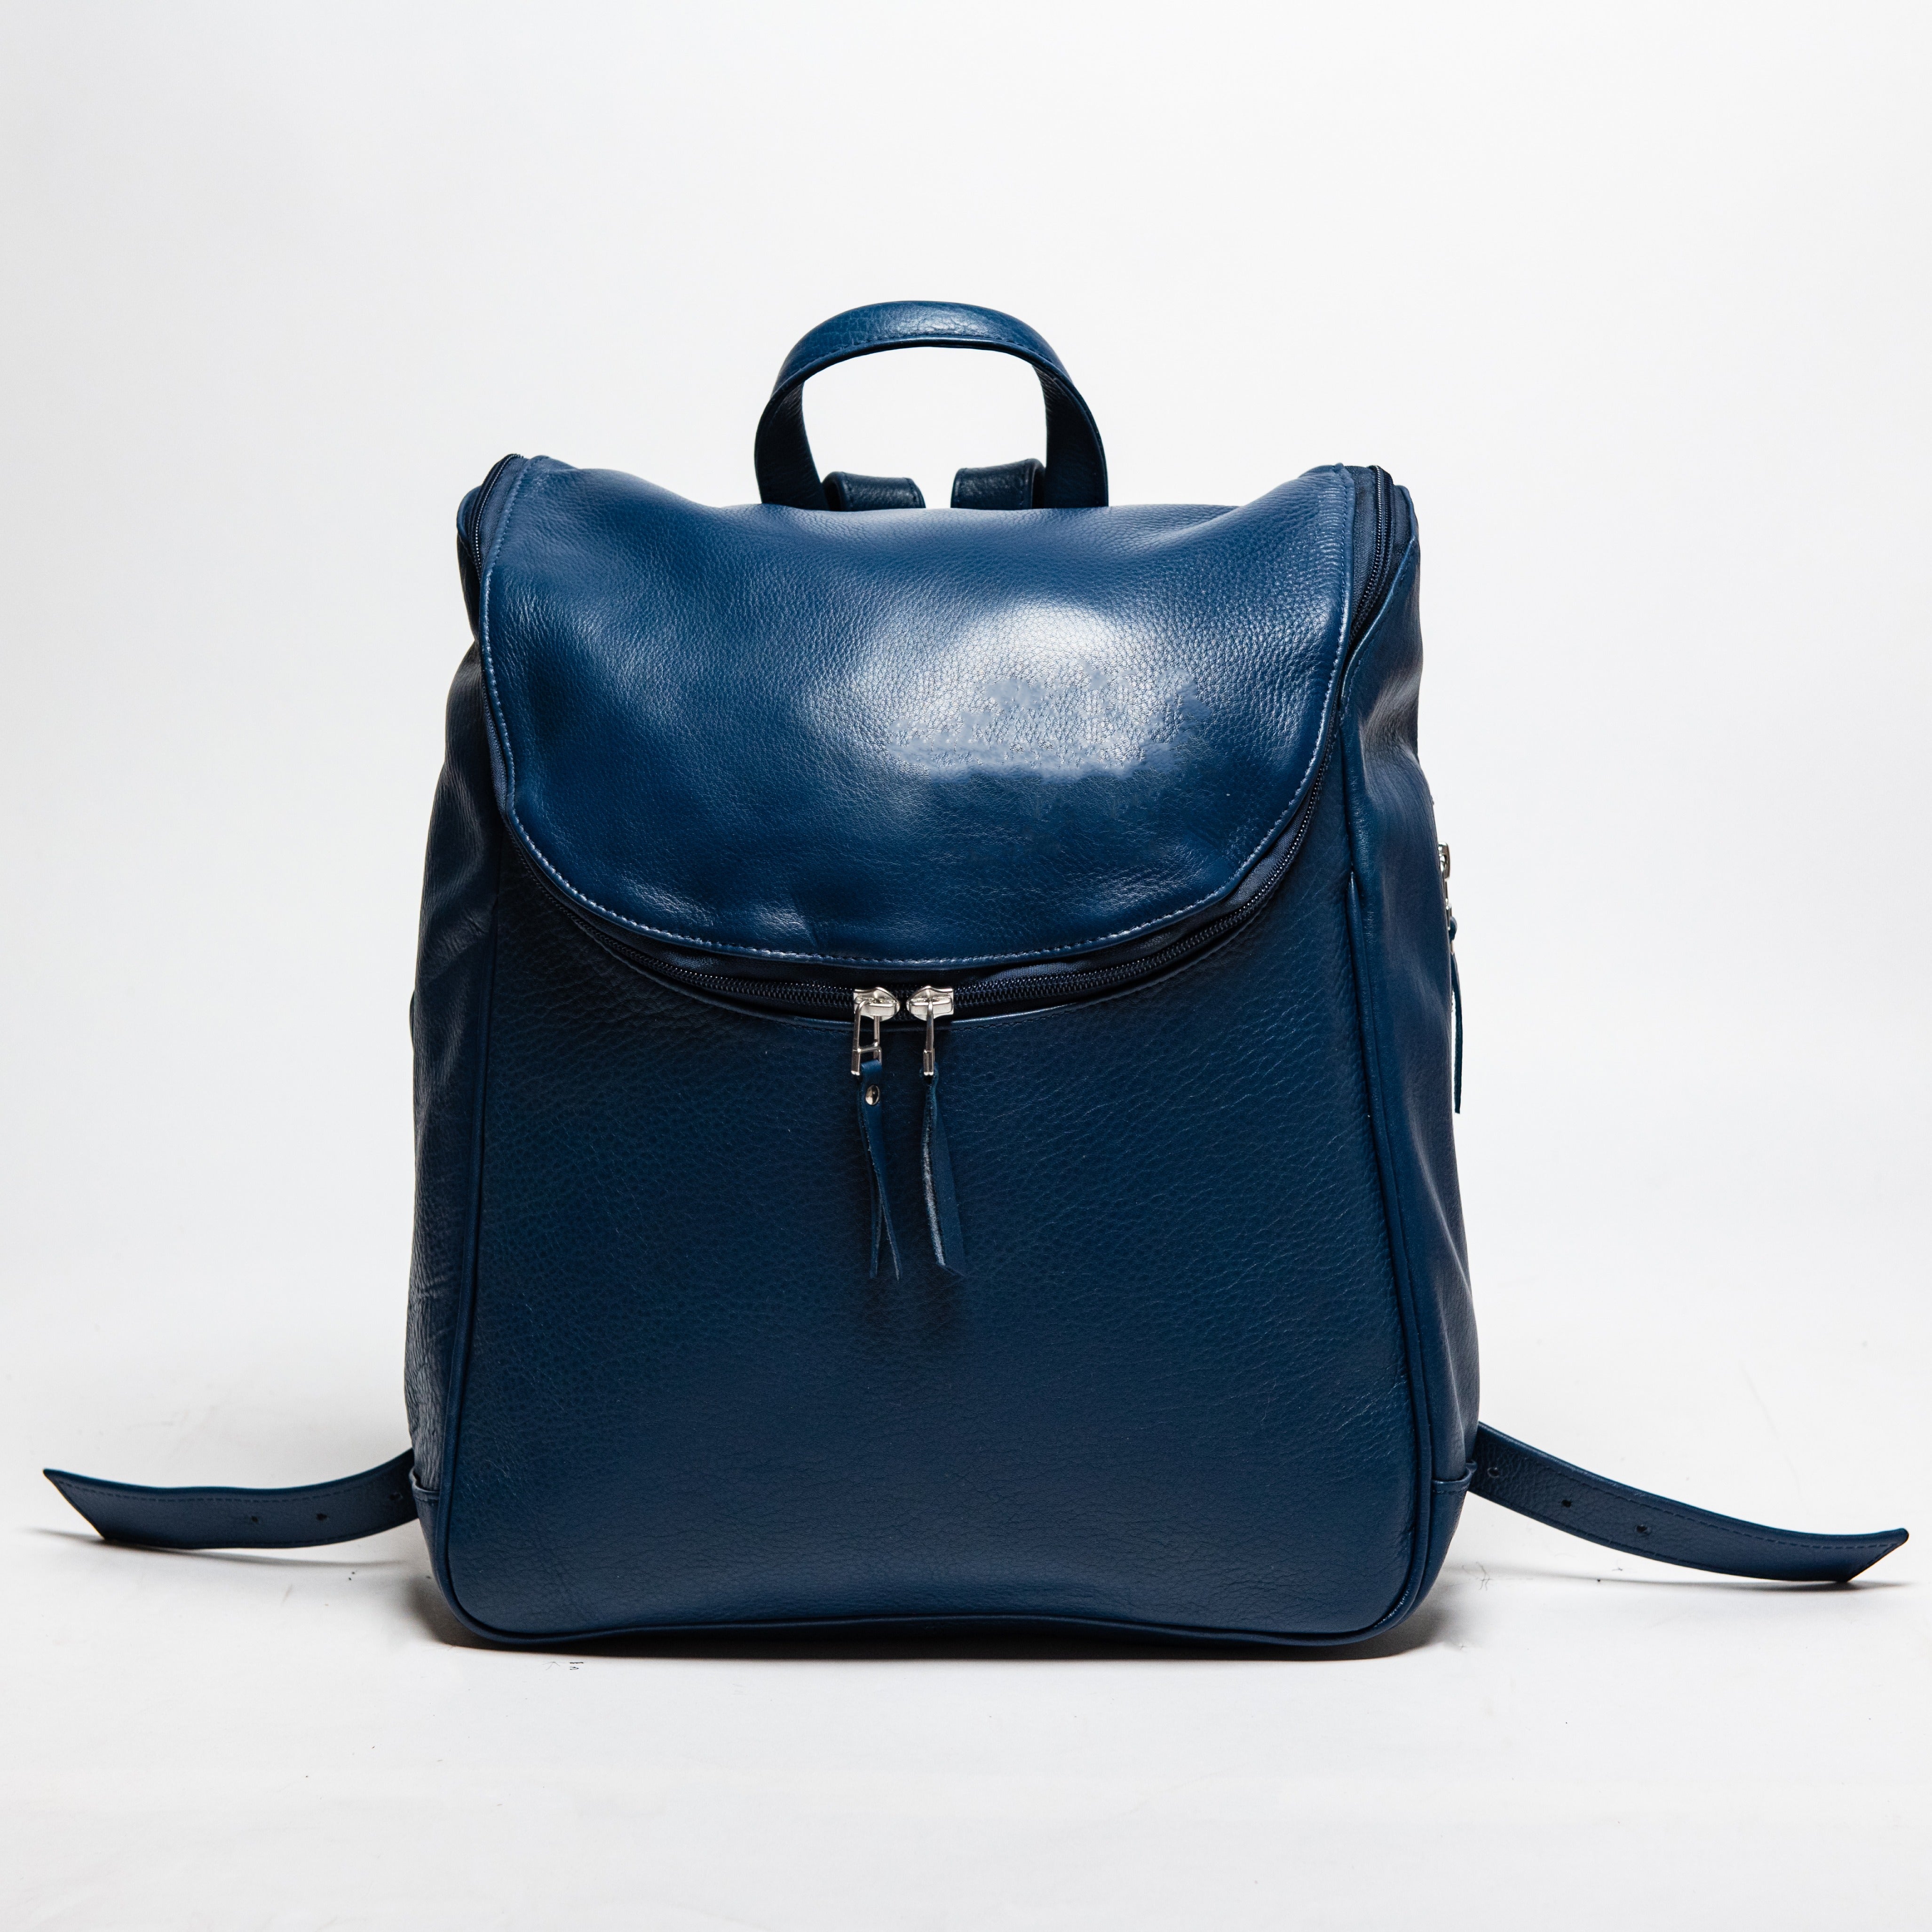 Student Leather Backpack - Blue